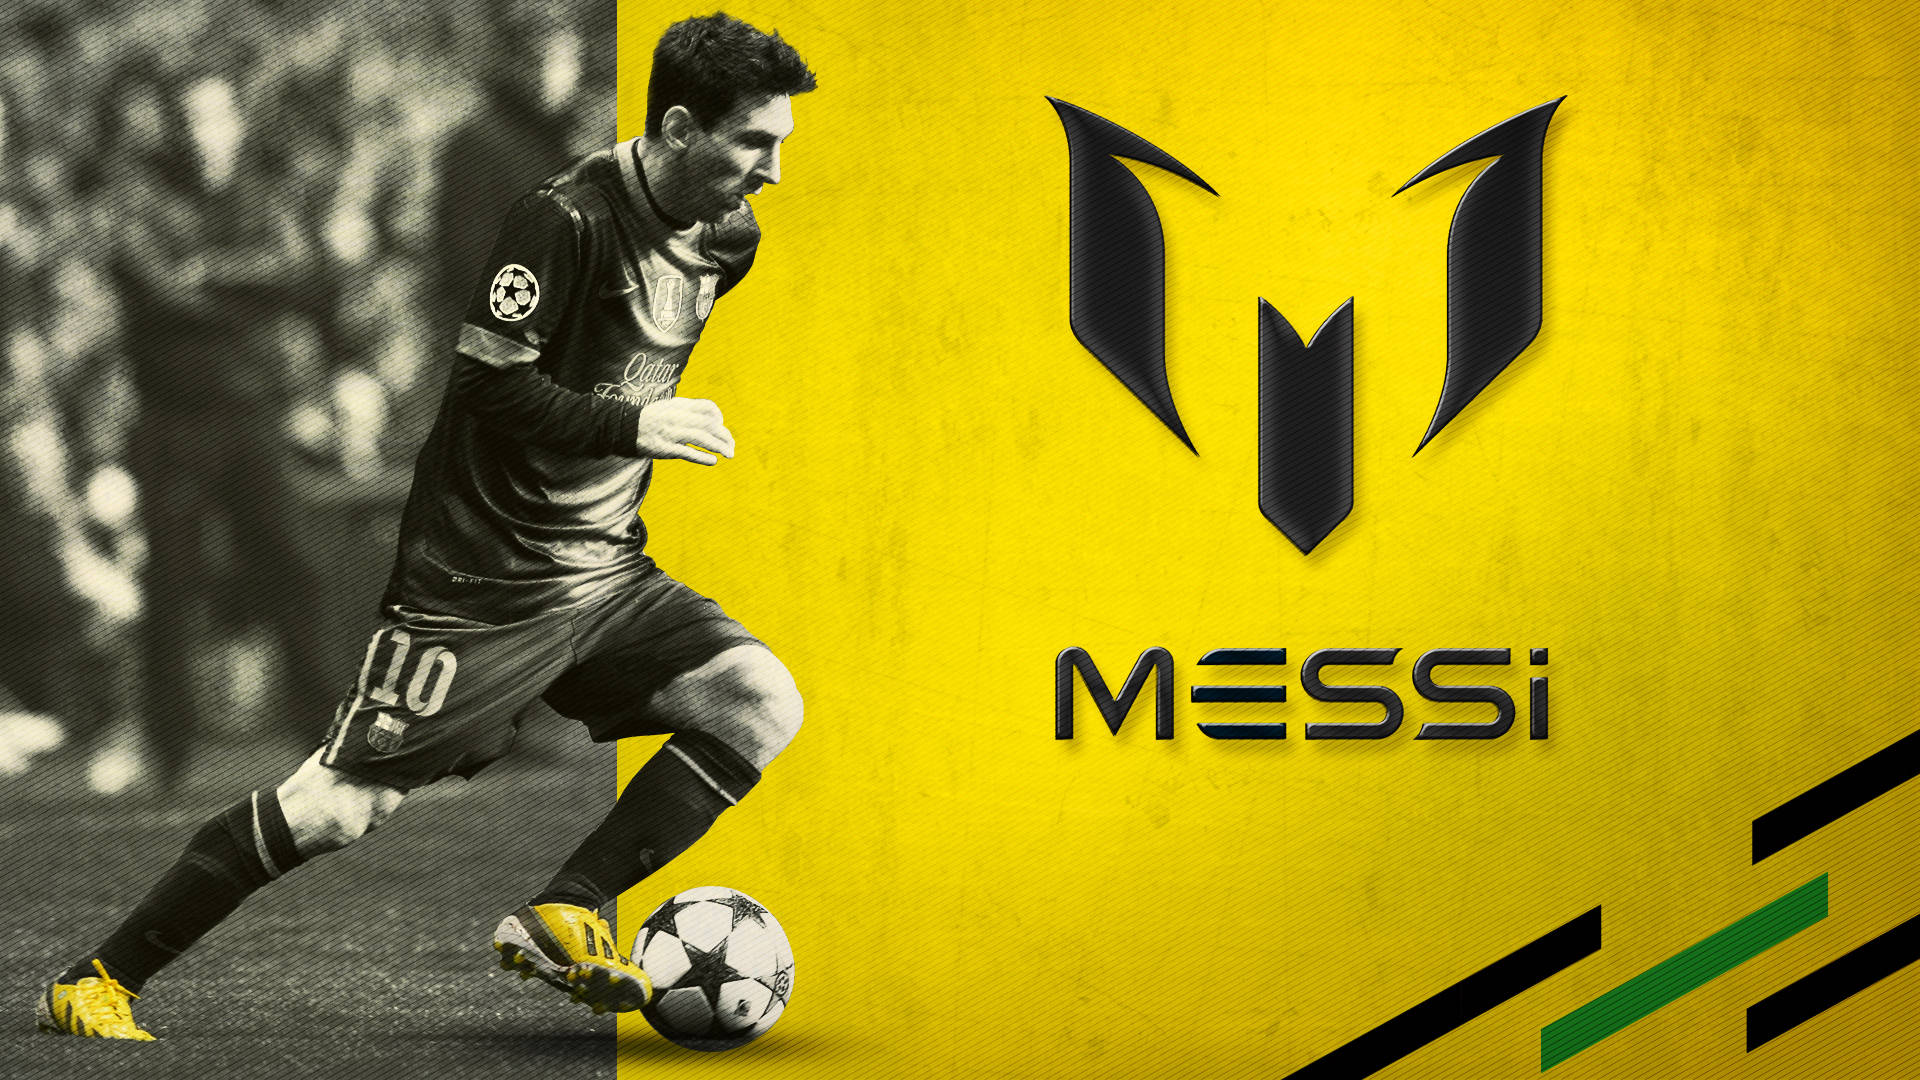 Cool Lionel Messi Poster Background